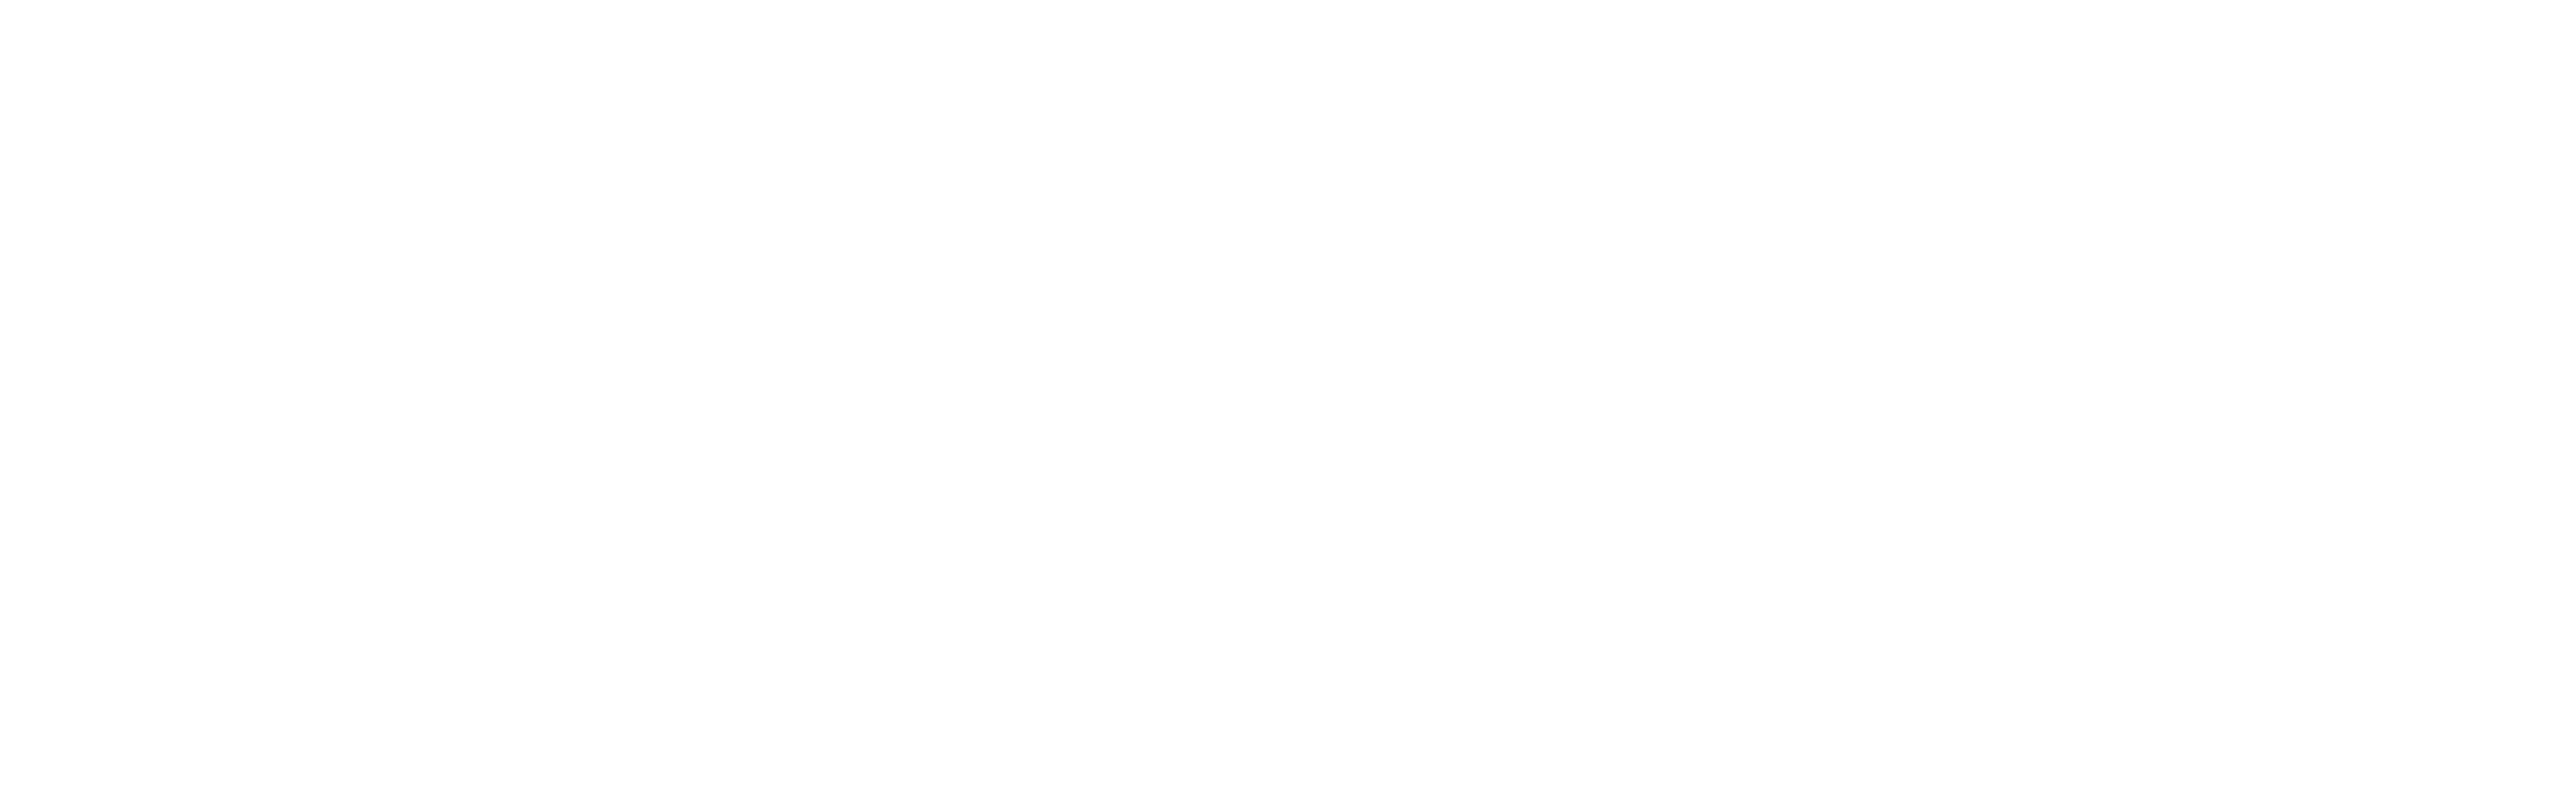 CrystalSound-logo-footer